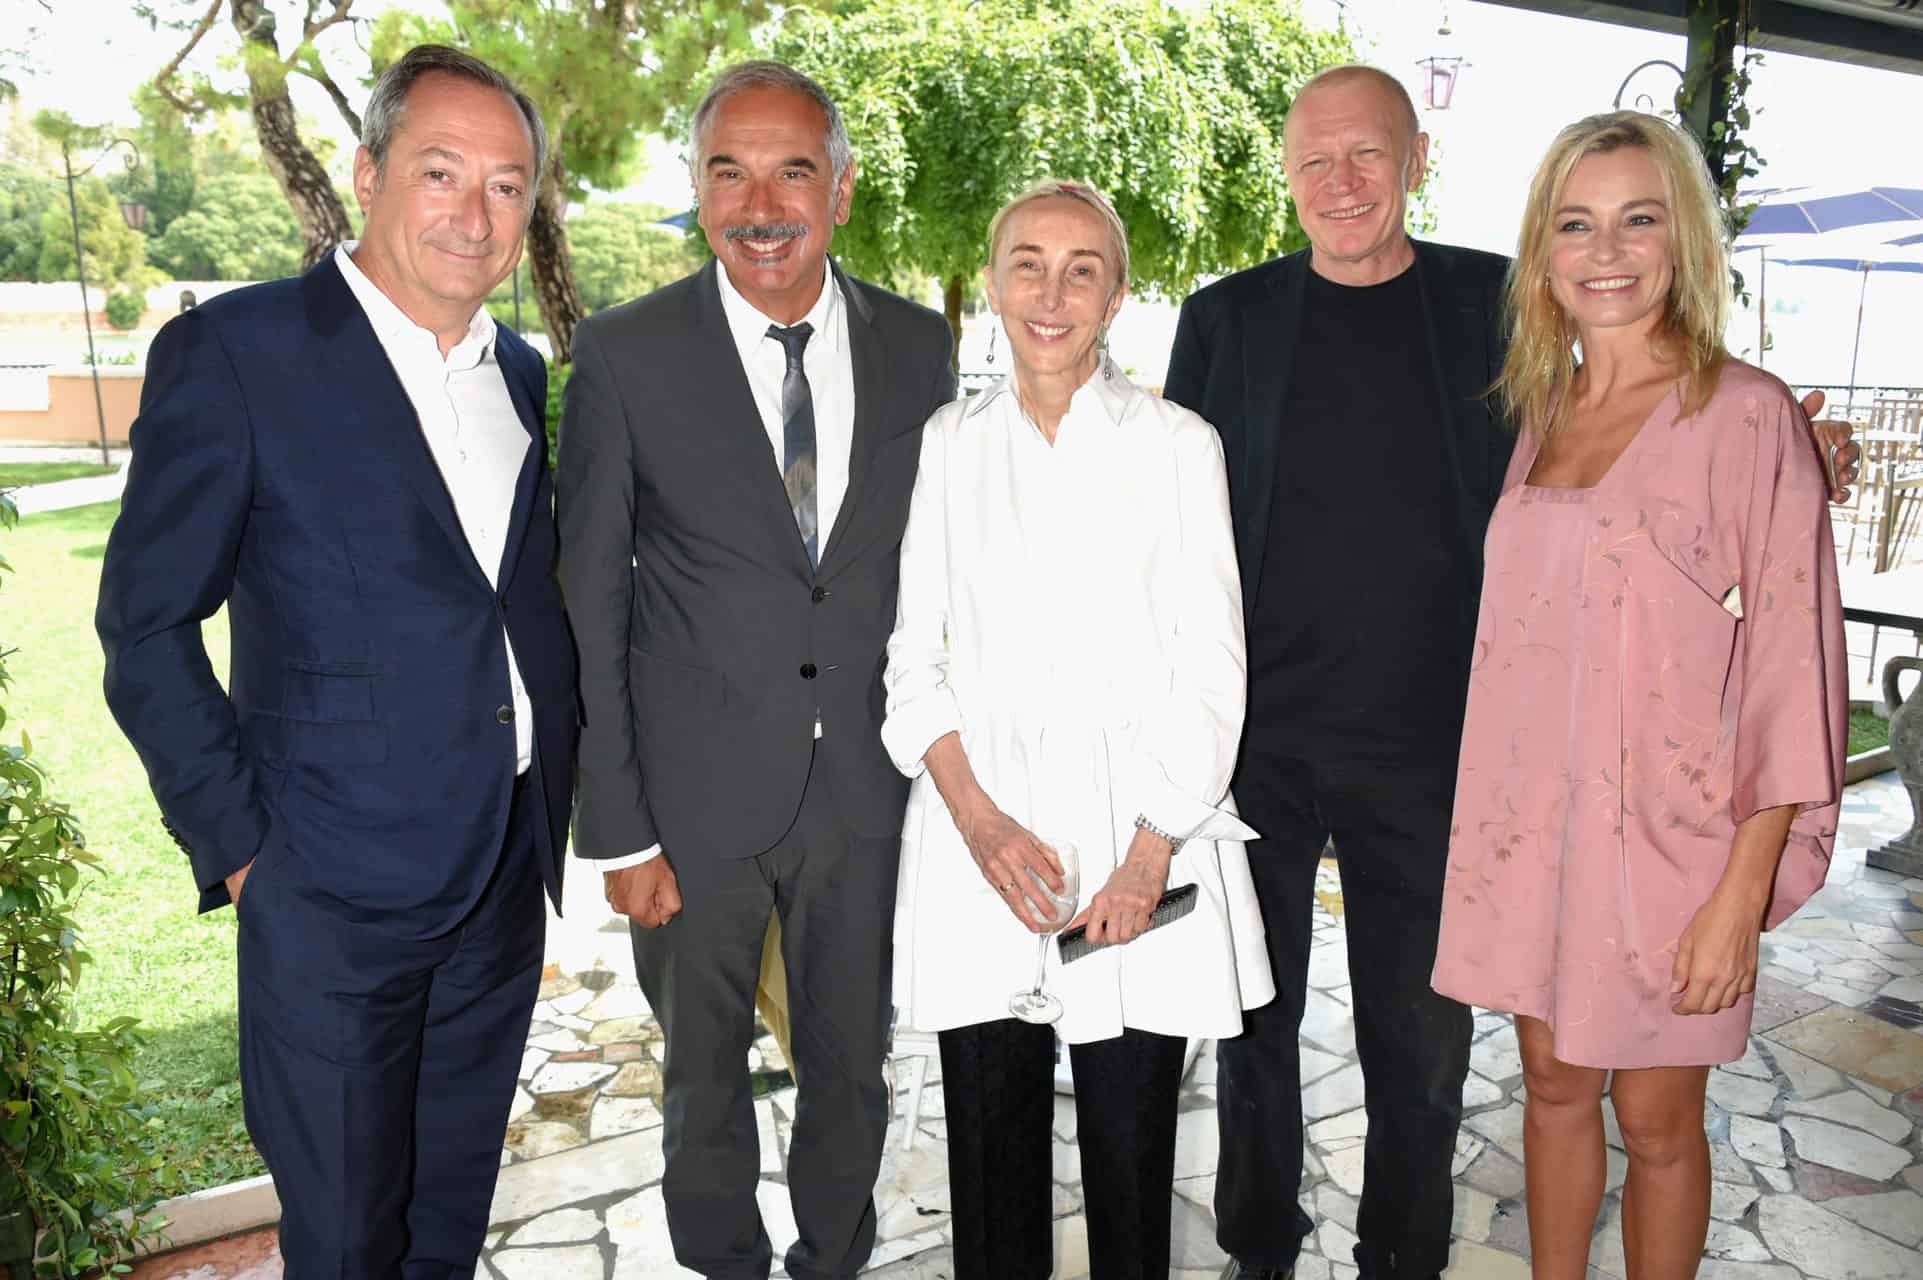 VENICE, ITALY - SEPTEMBER 01: (L-R) Stefano Sassi, Carlo Capasa, Carla Sozzani, a guest and Stefania Rocca Felice attend an intimate lunch hosted by Livia Firth, Carlo Capasa and Caroline Scheufele to announce Chopard as partner for The Green Carpet Fashion Awards at Hotel Cipriani on September 1, 2017 in Venice, Italy. (Photo by David M. Benett/Getty Images for Eco-Age) *** Local Caption *** Stefano Sassi; Carlo Capasa; Carla Sozzani; Stefania Rocca Felice